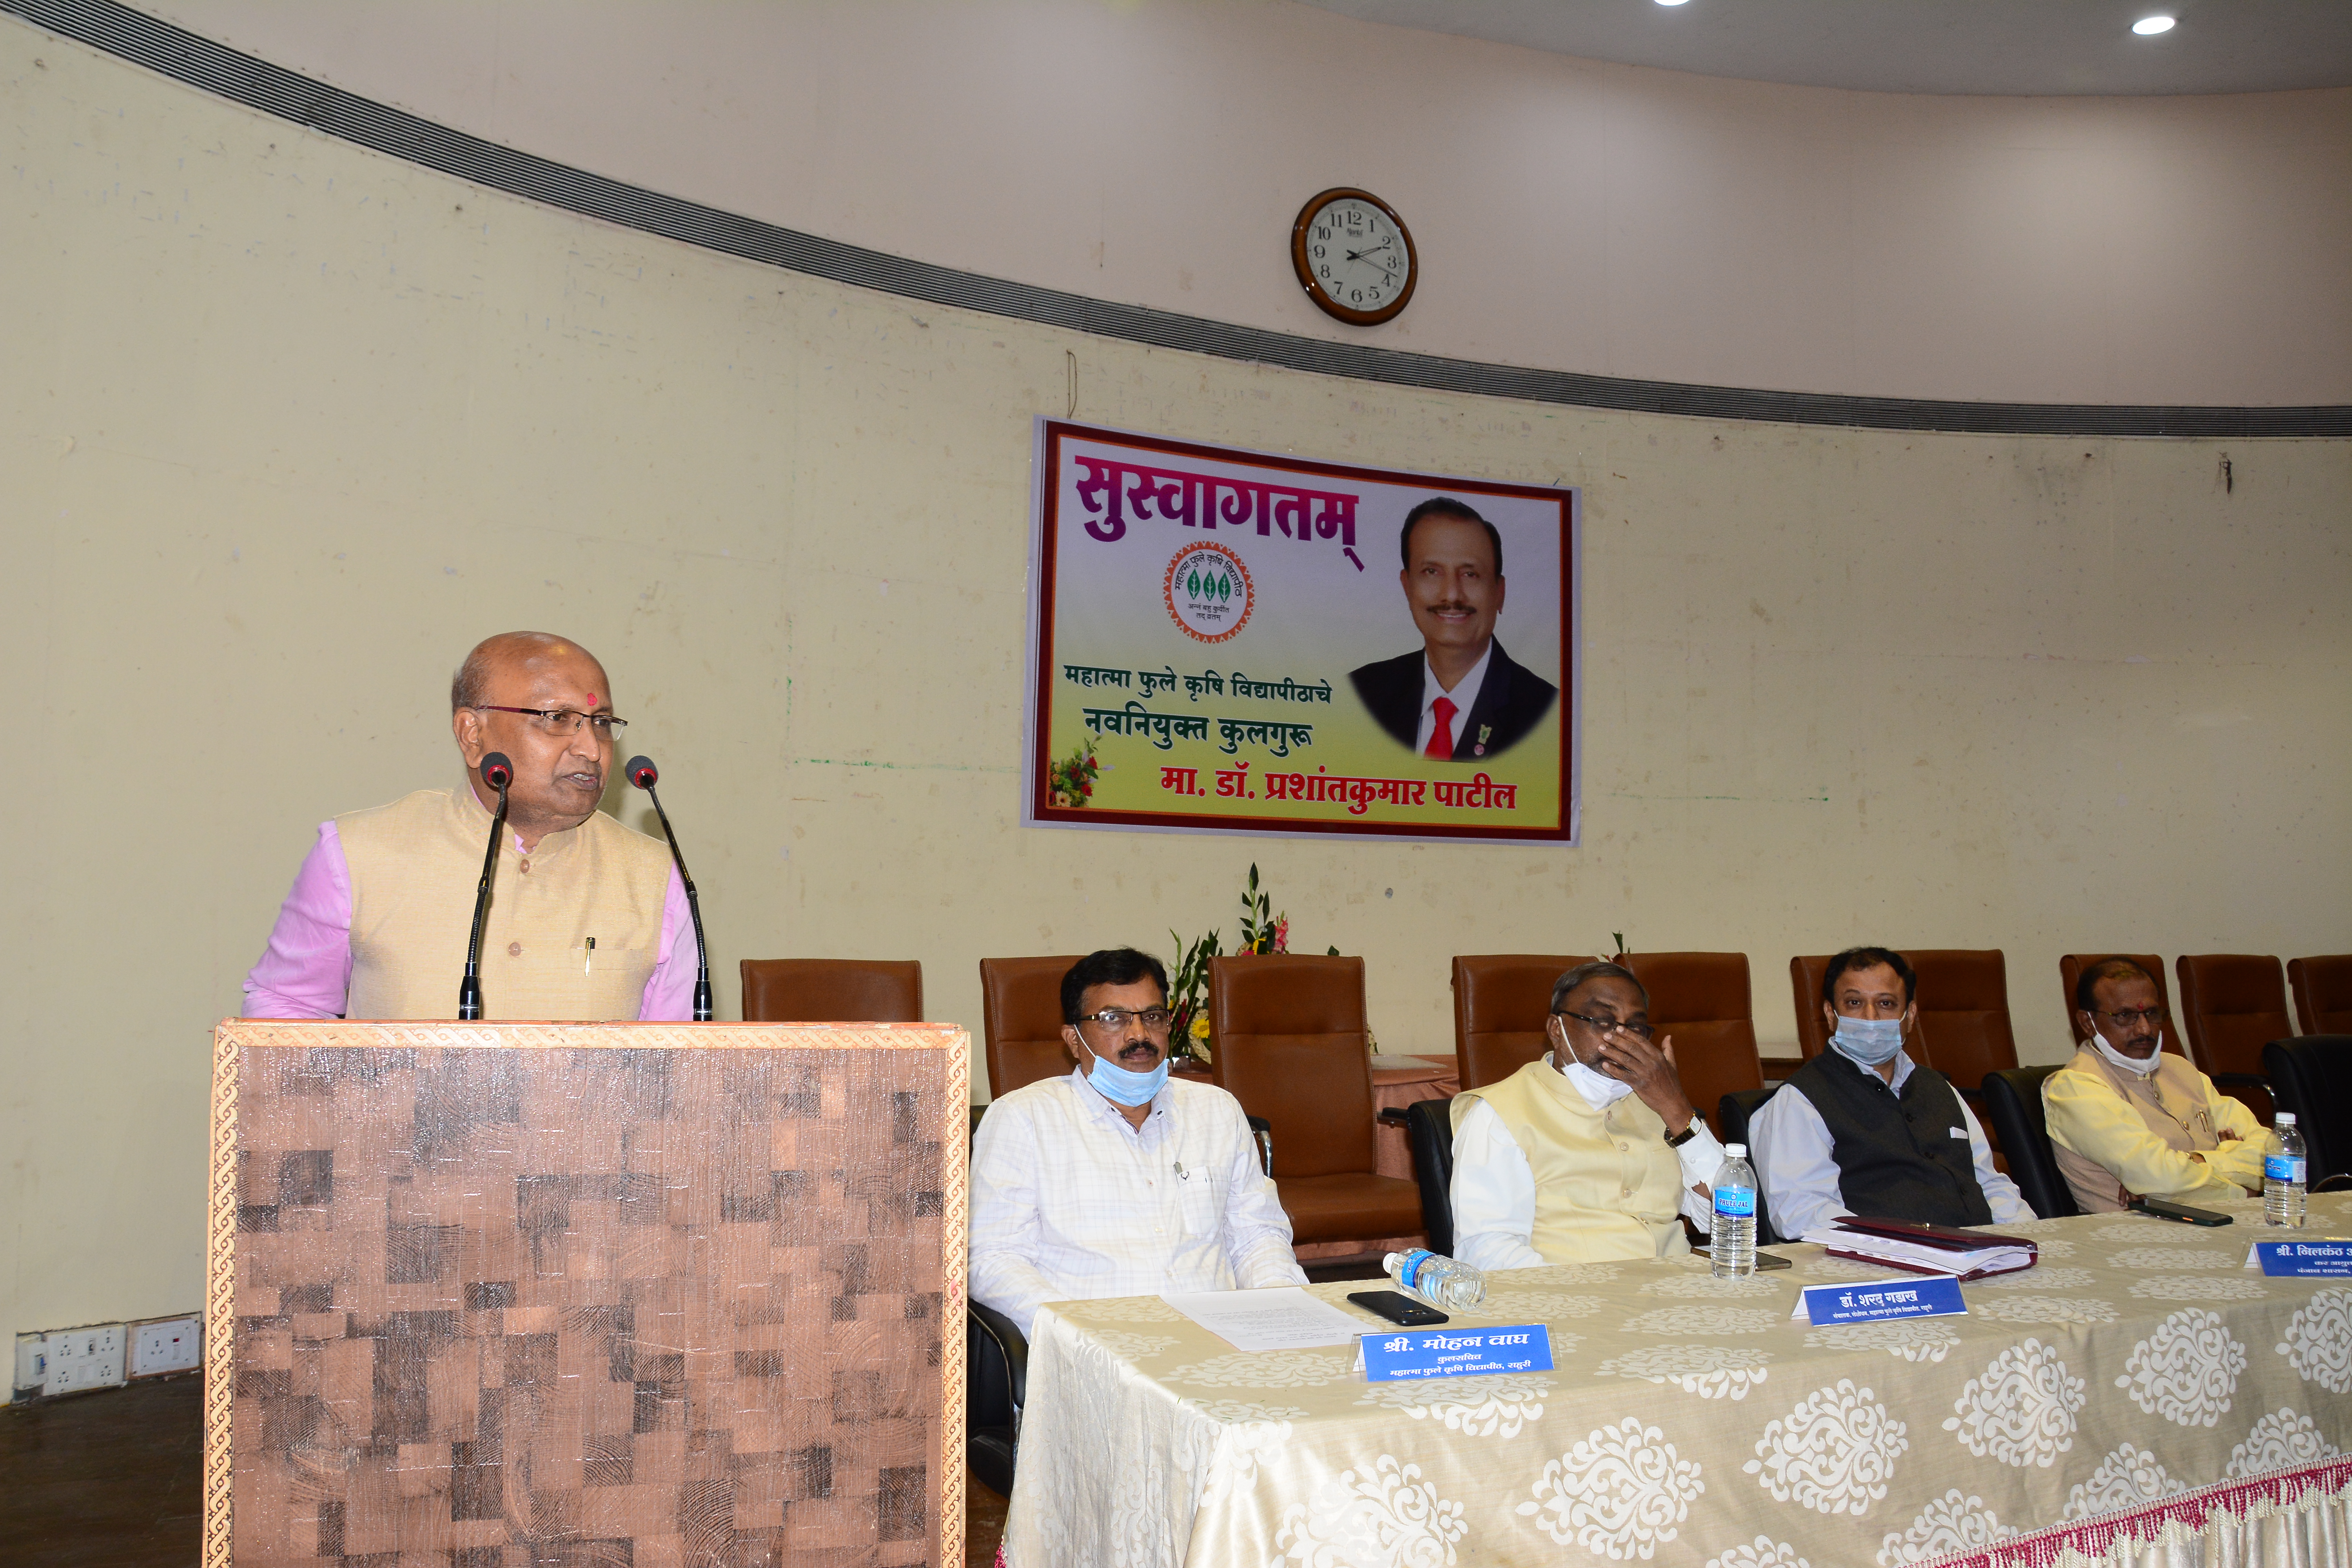 Welcome of Vice Chancellor Dr. P. G. Patil